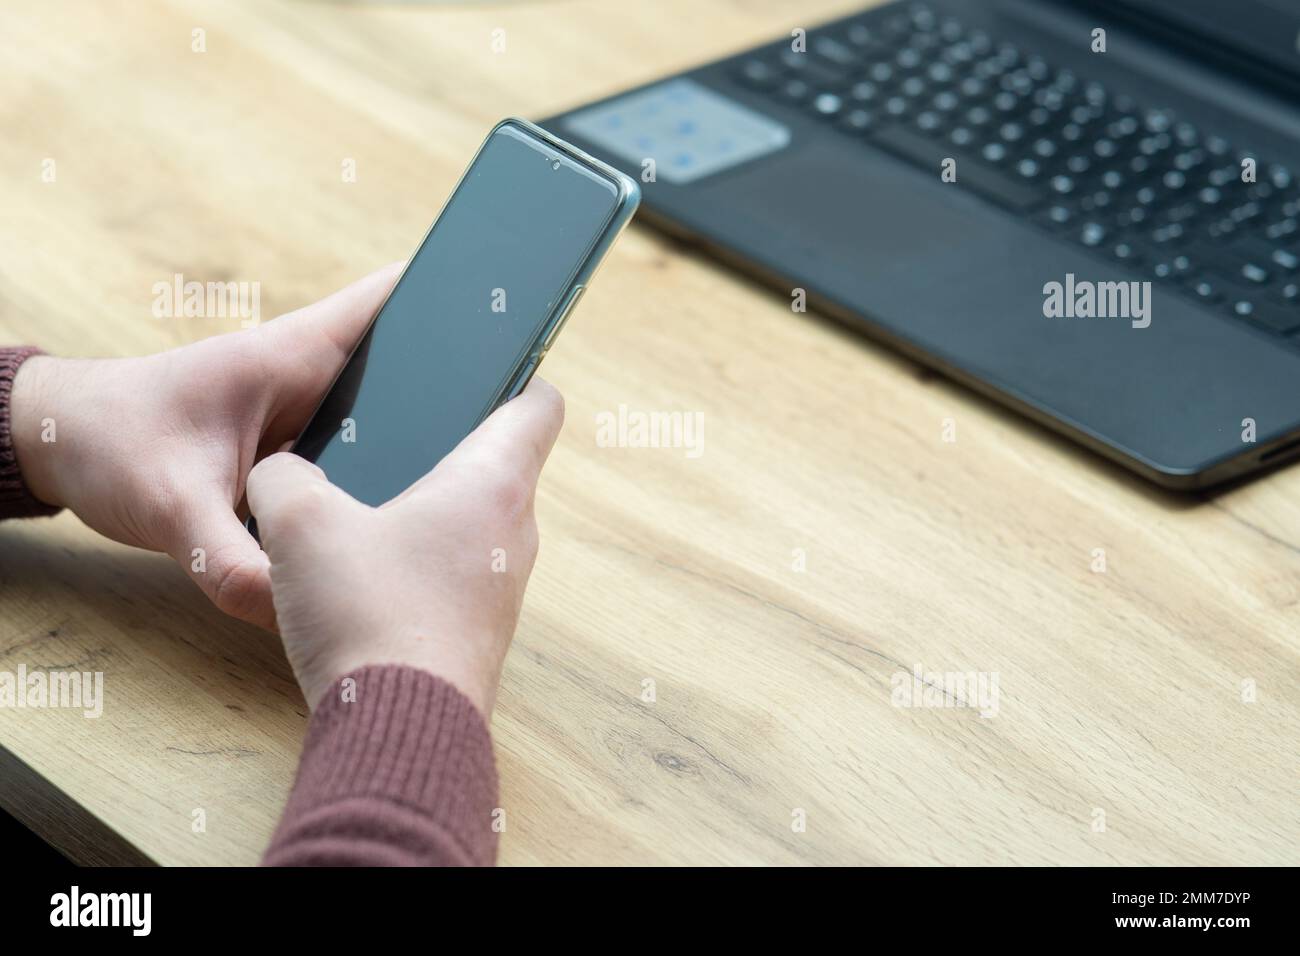 Man hands holding smartphone. Man using smartphone and pointing on the screen with one finger Stock Photo